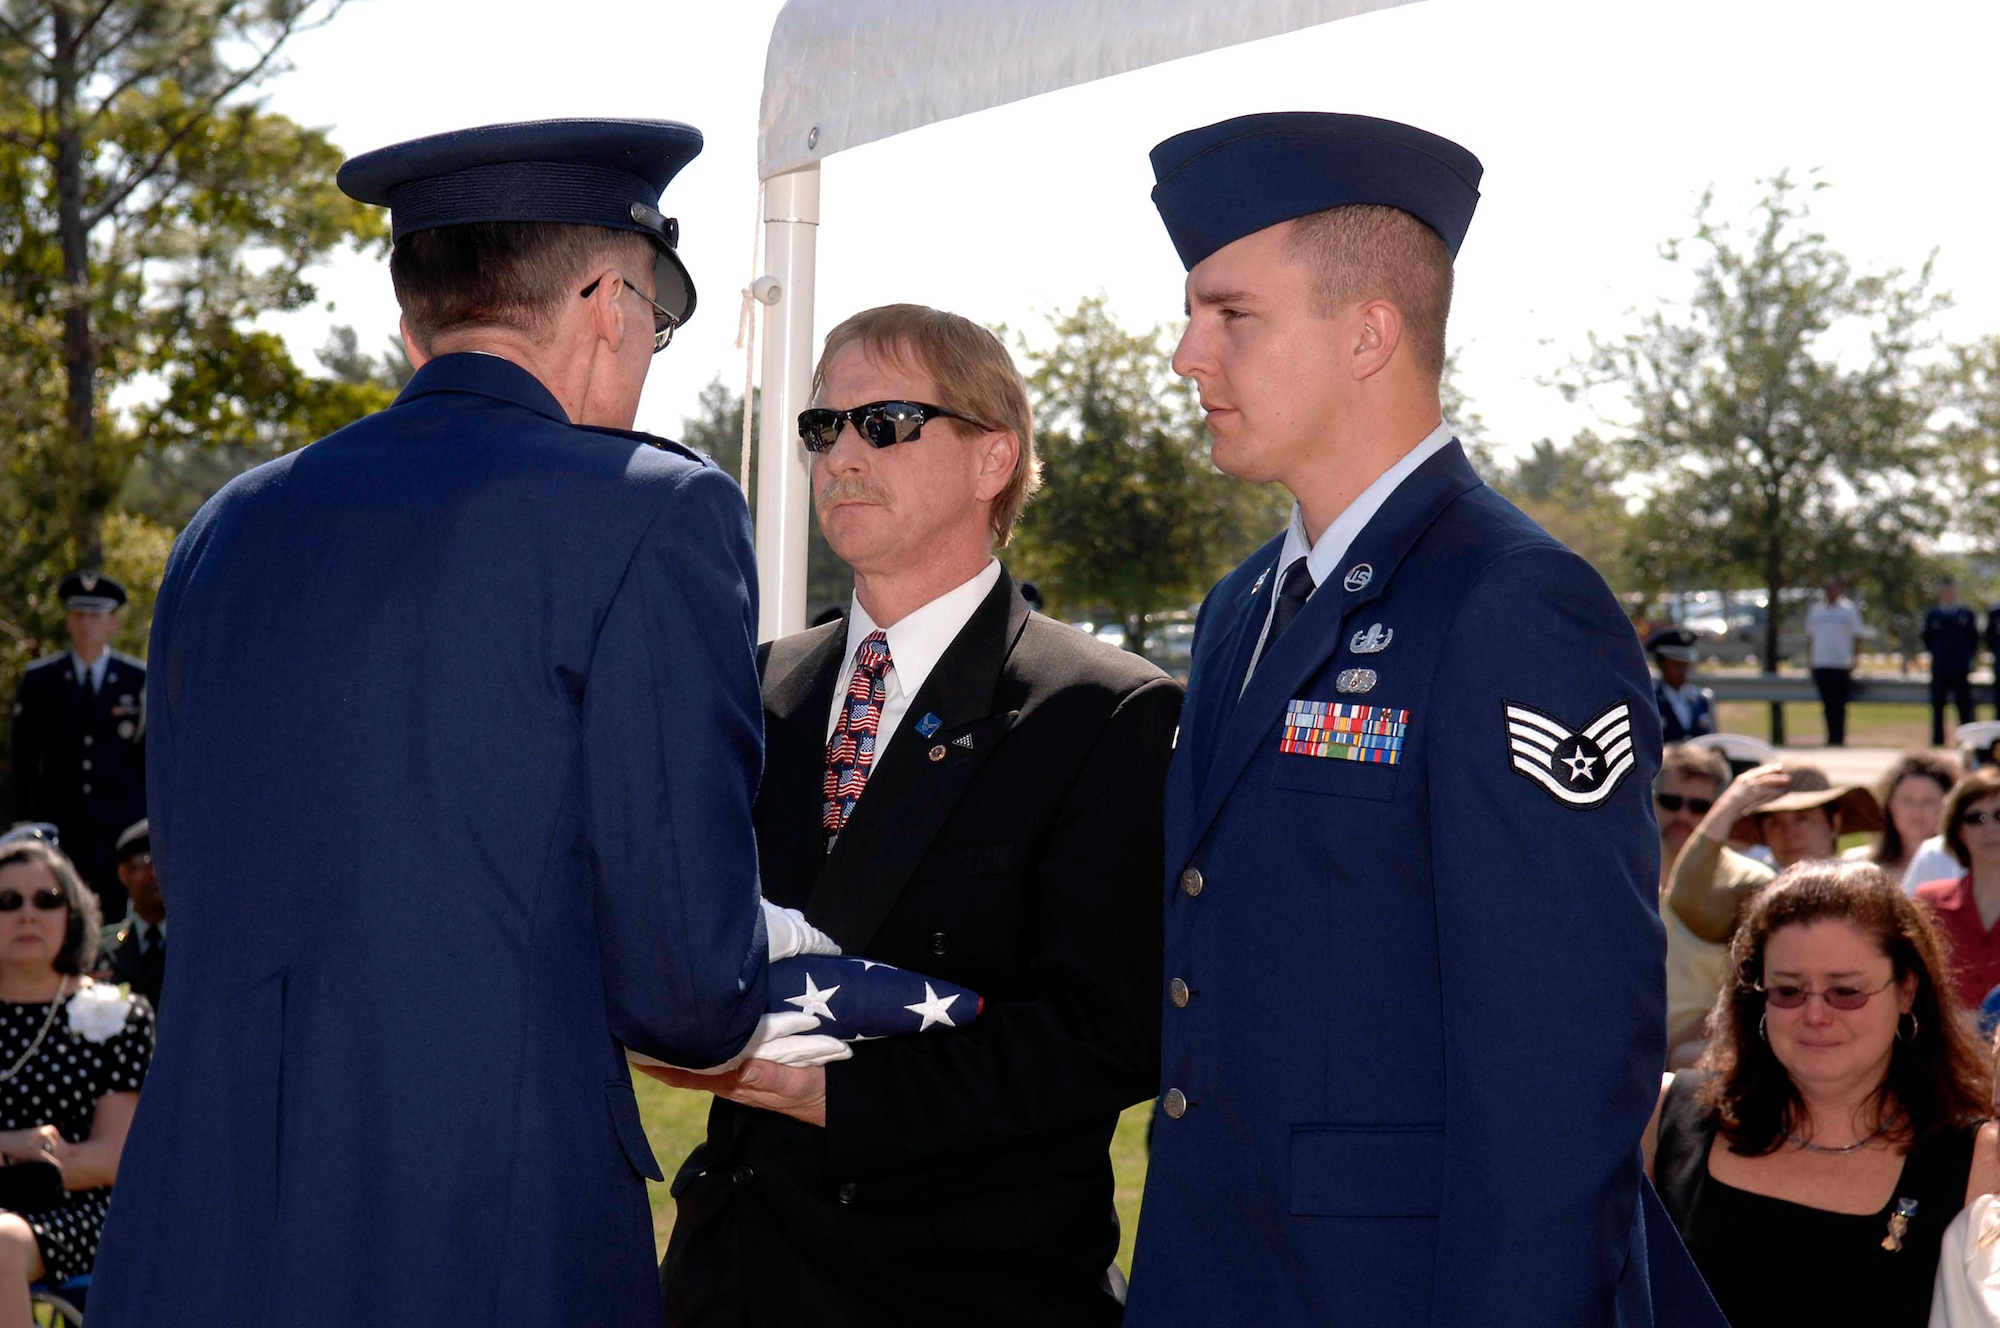 Lt. Gen. Donald Wetekam presents an American flag to Senior Airman Elizabeth Loncki's father, Stephen Loncki, and her fiance`, Staff Sgt. Jayson Johnson during the Explosive Ordnance Disposal's 38th Annual Memorial Service held April 21 at Eglin Air Force Base's Kauffman EOD Training Complex in Fla. Airman Loncki was killed Jan. 7 while responding to an improvised explosive device near Baghdad, Iraq. General Wetekam is the deputy chief of staff for Installations and Logistics Headquarters U.S. Air Force in Washington D.C. (U.S. Air Force photo/Bruce P. Hoffman)